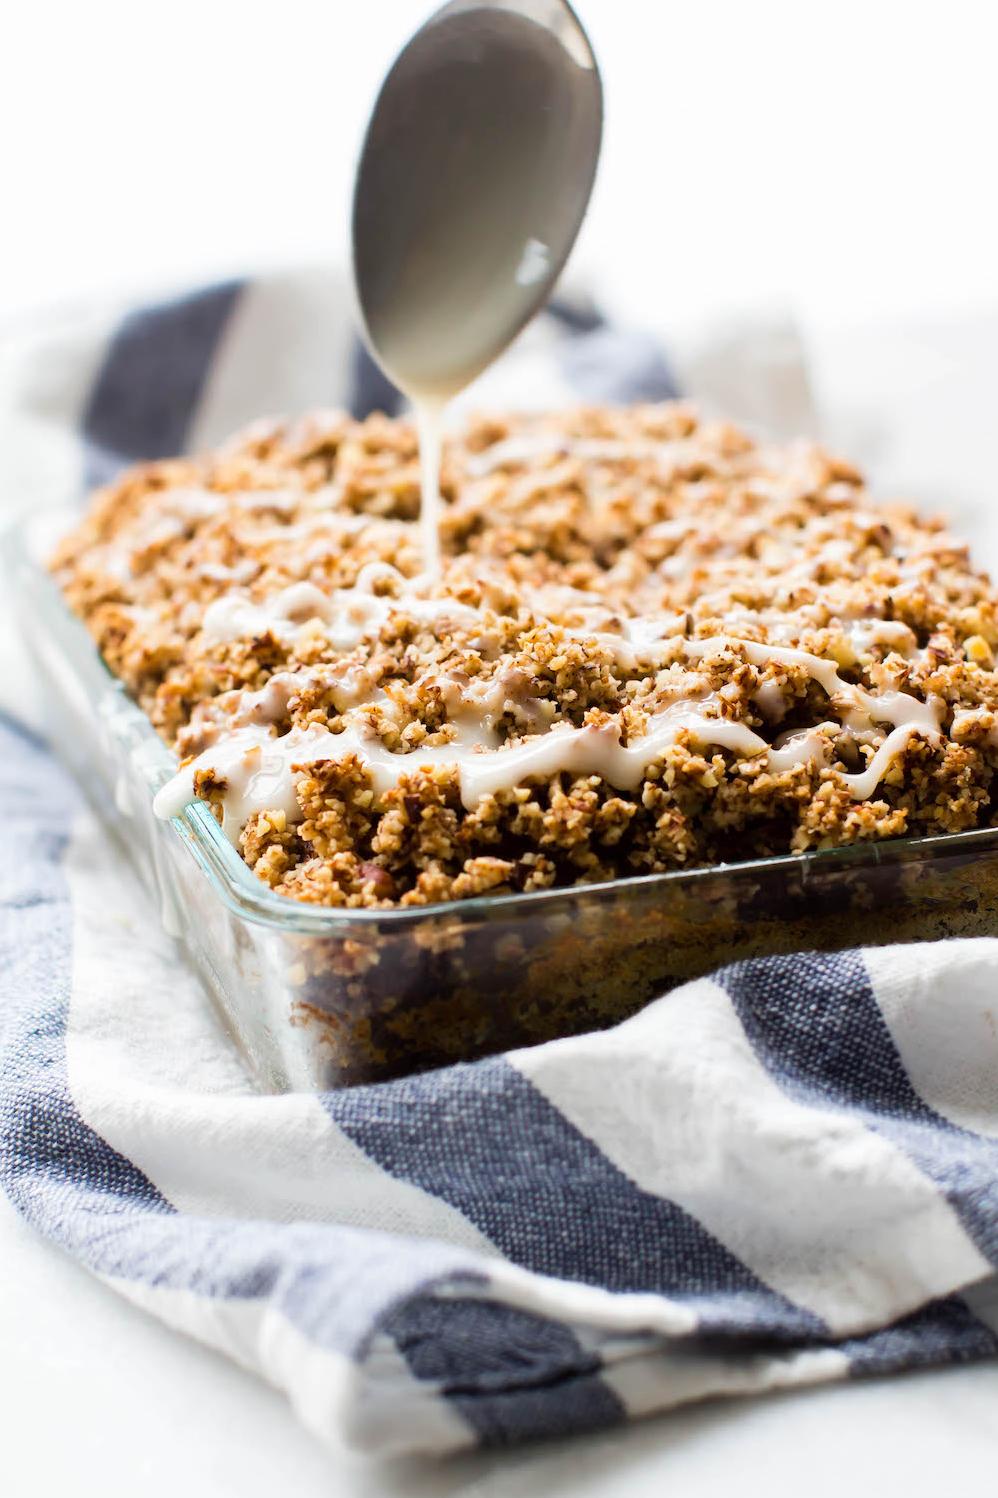  This vegan coffee cake is the perfect way to start your day on a wholesome note.